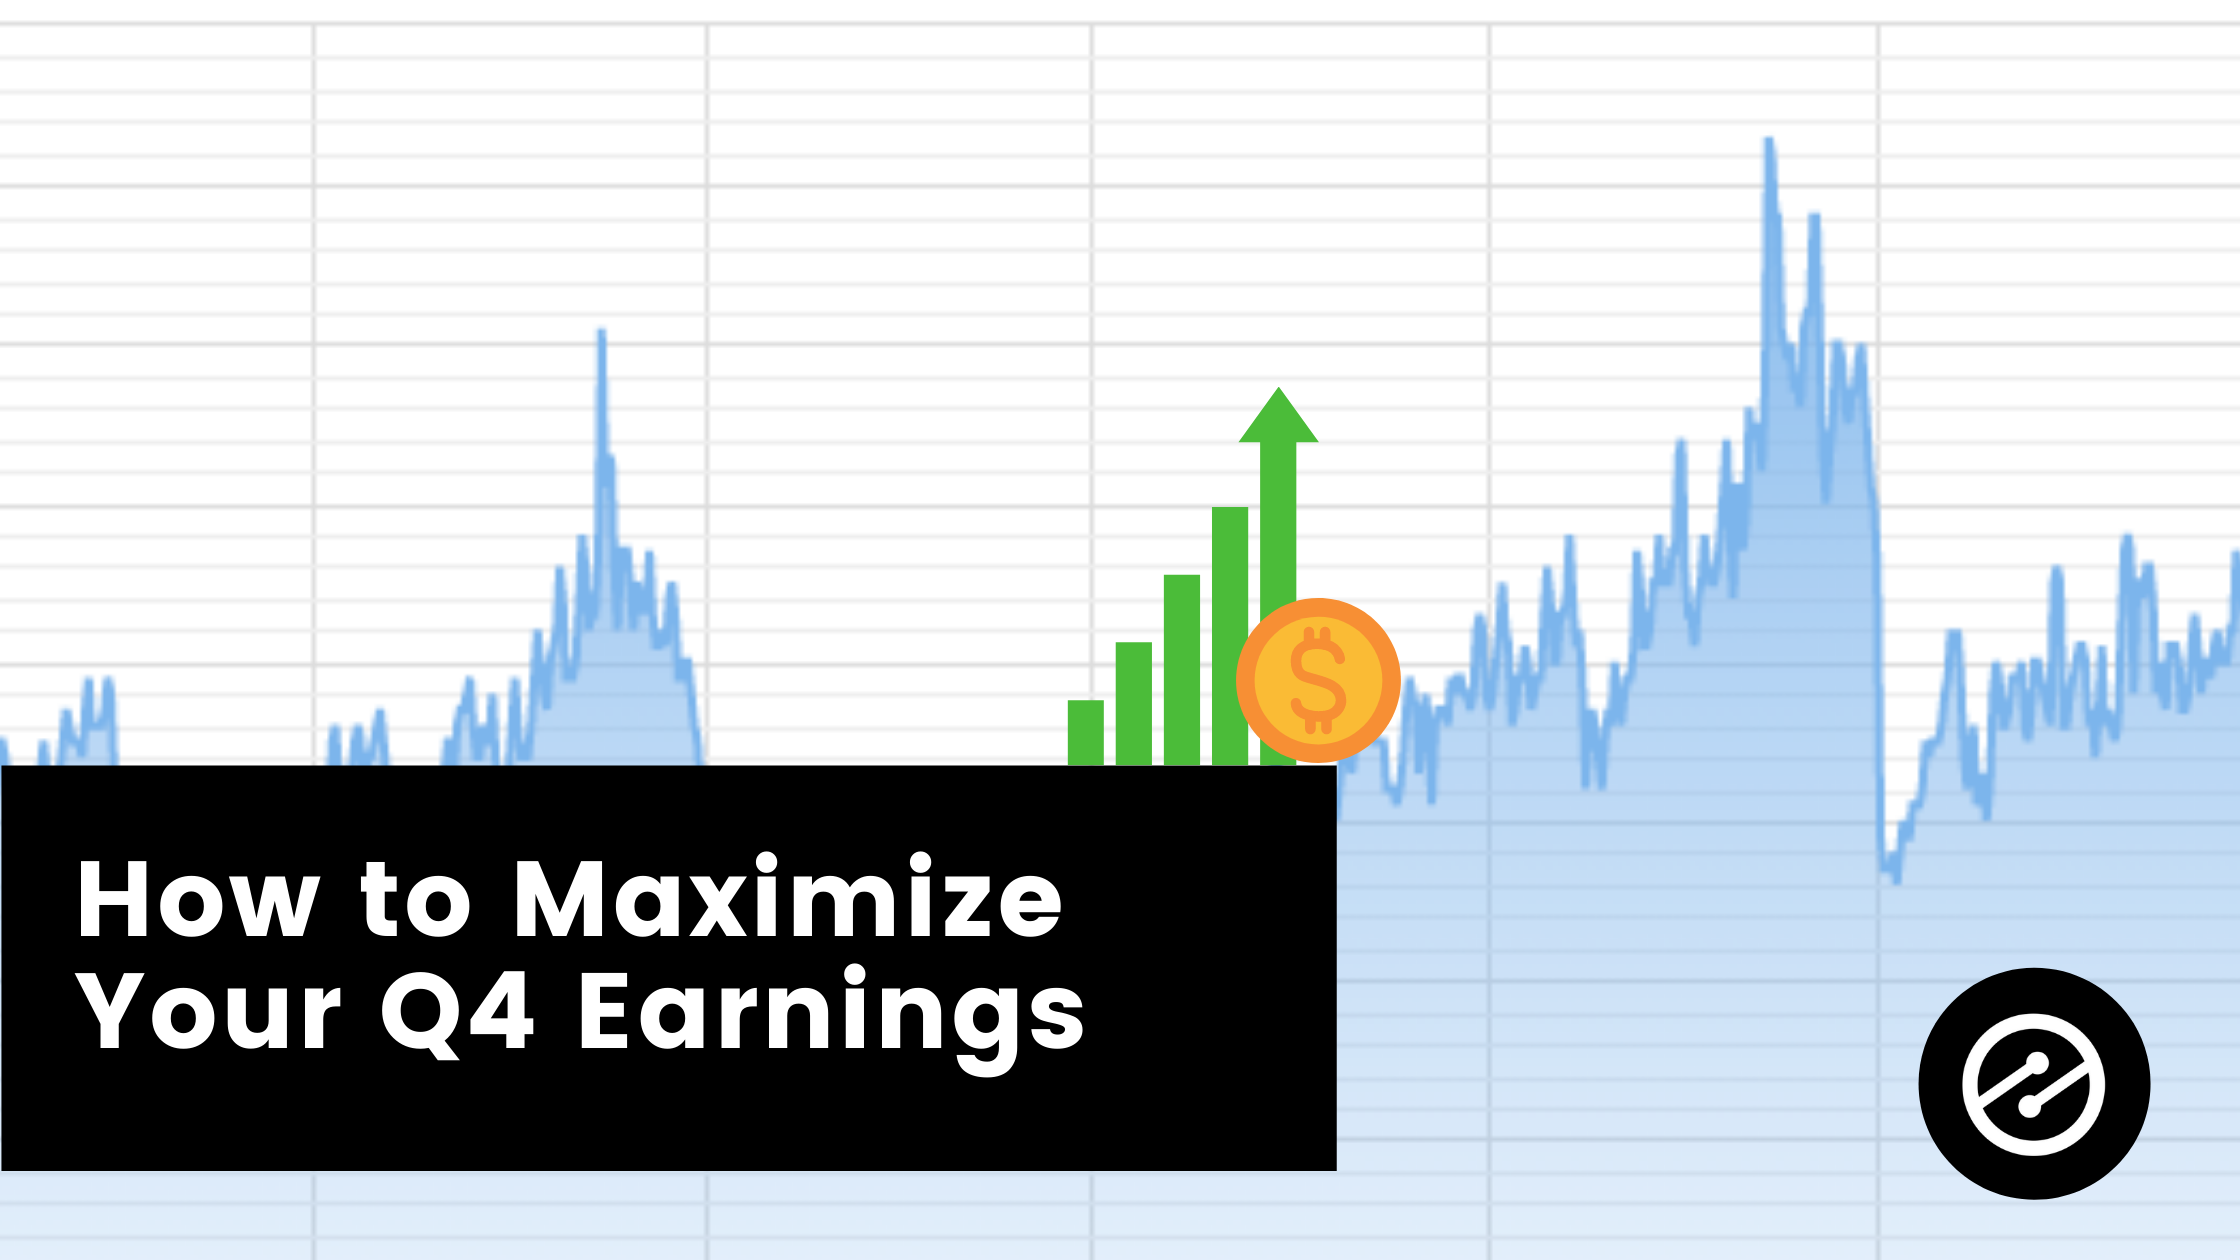 How to Maximize Your Q4 Ad Earnings